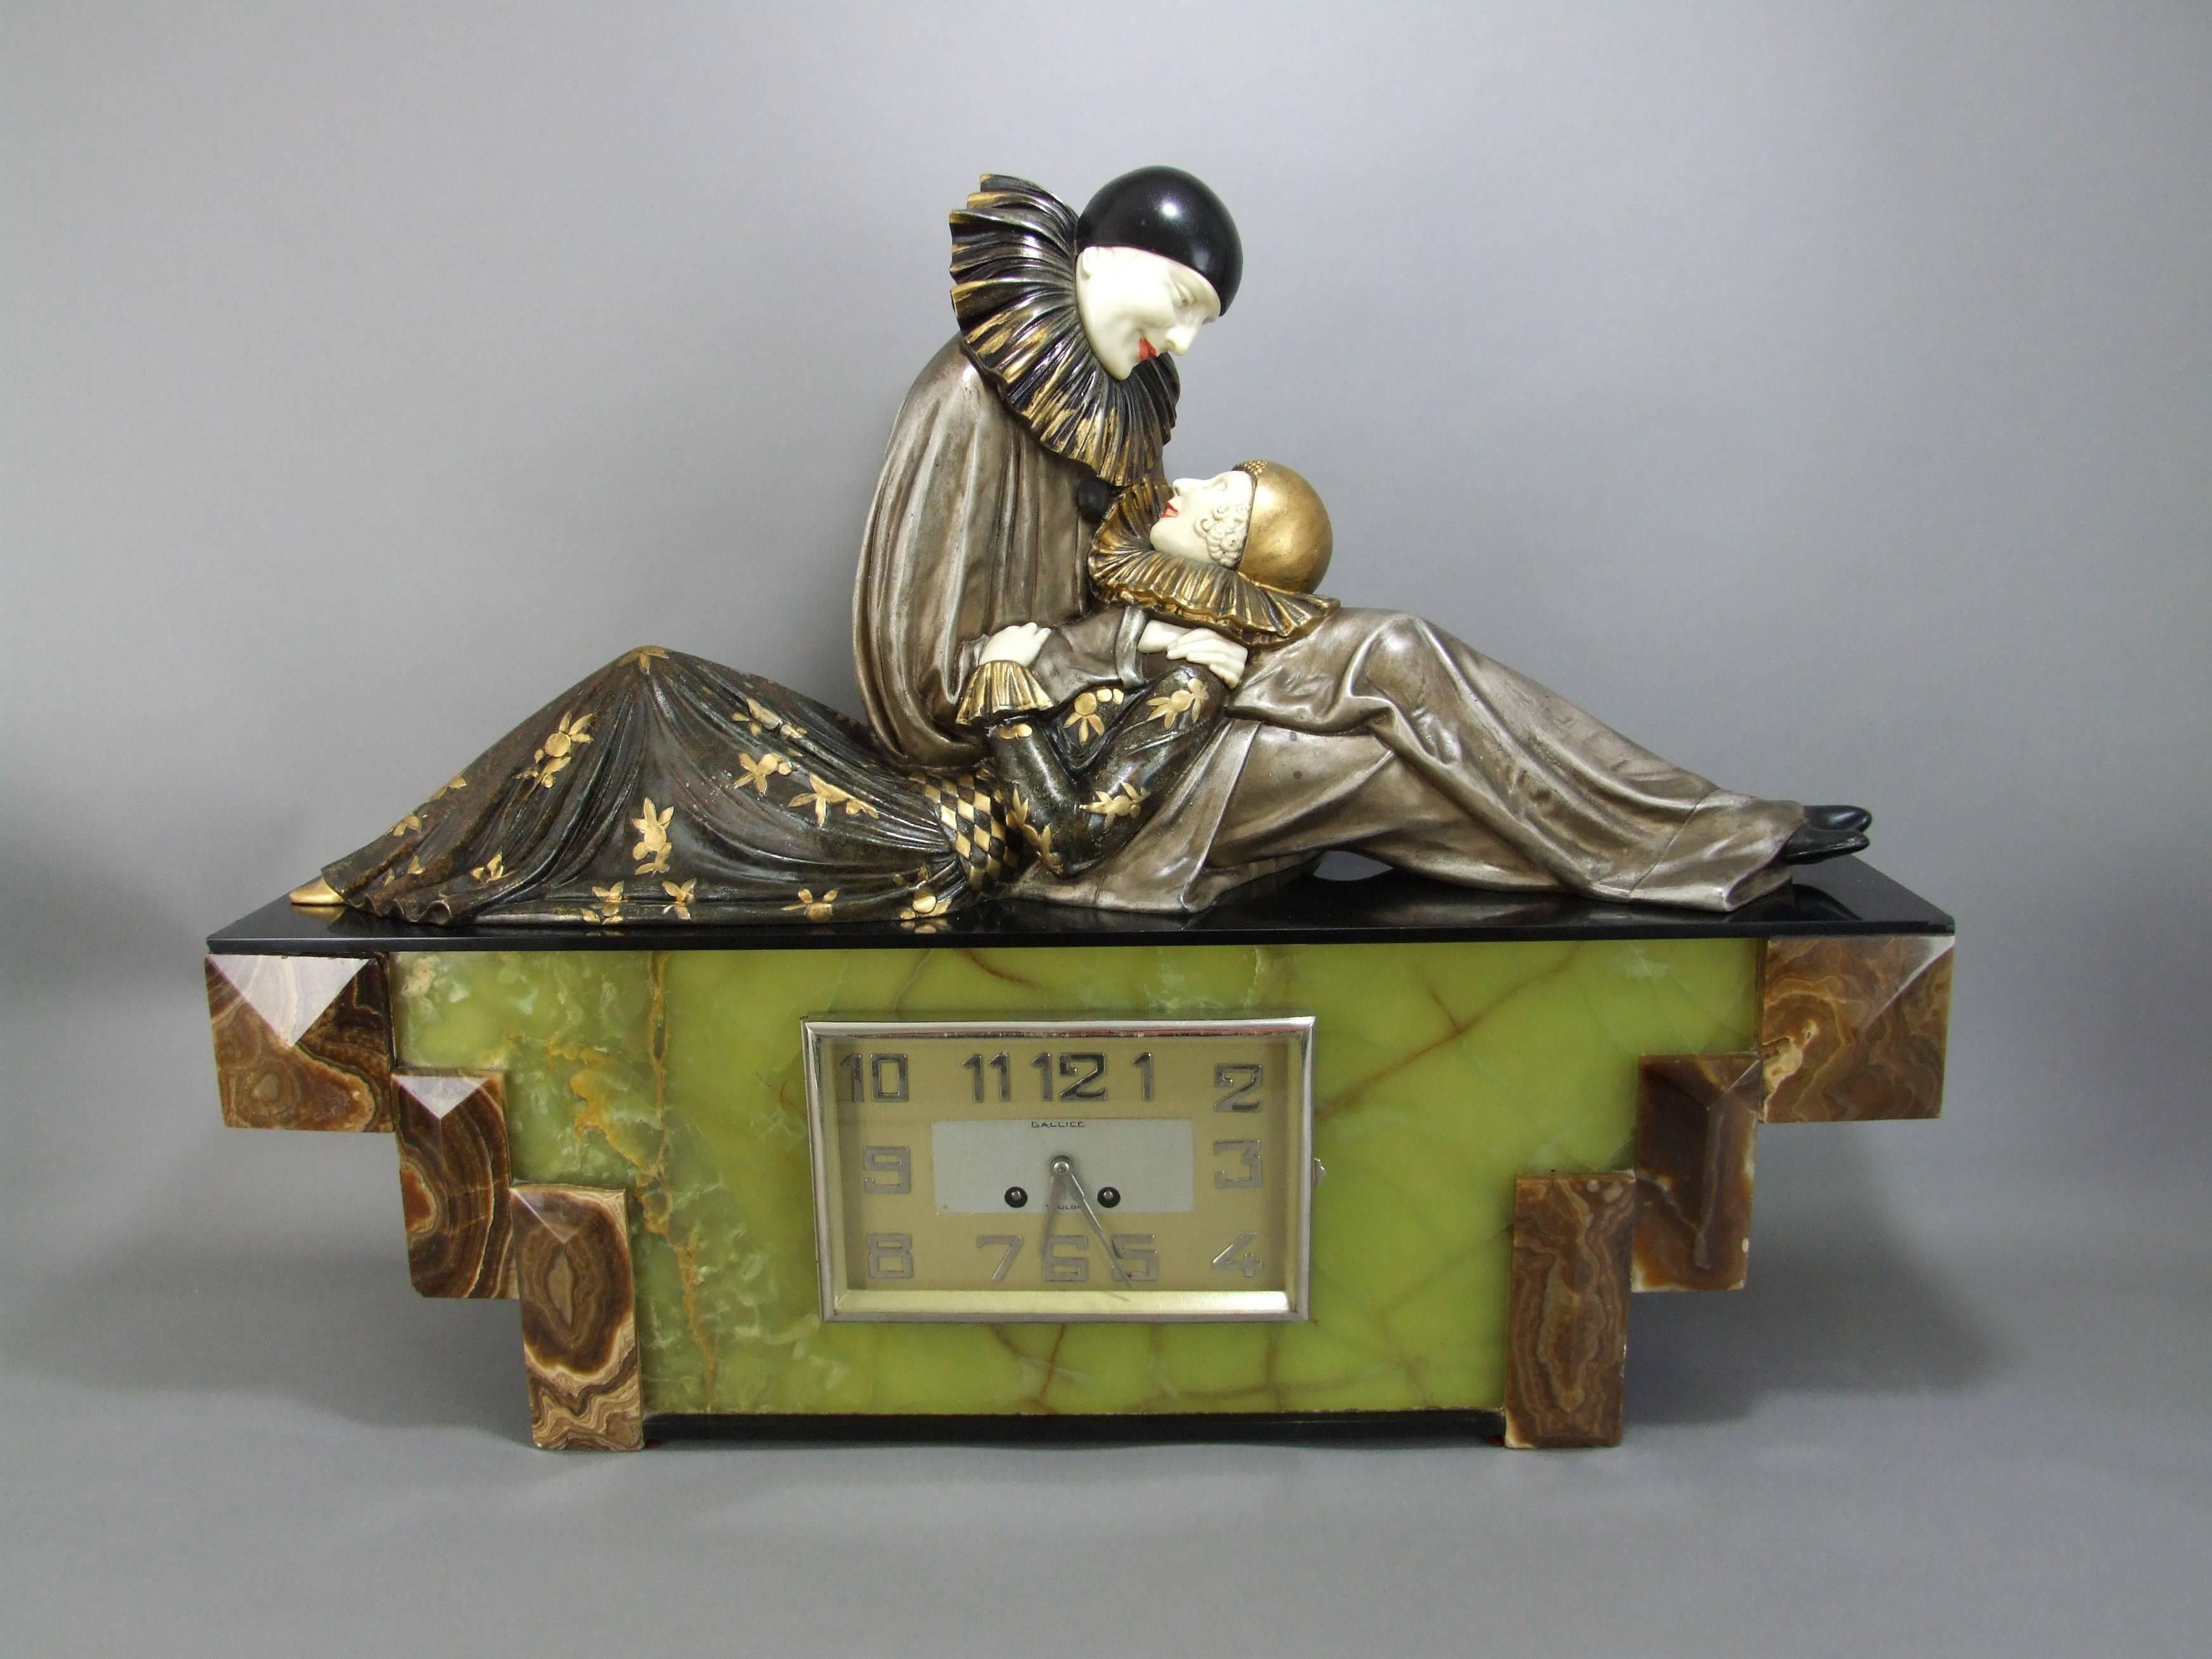 Rare large Art Deco clock set by Demetre Chiparus. Its title is Eternal Story and it is rare as a statue but I have never seen it before as a clock. It is unsigned although the clock face has a title of Gallice and Toulon. Cold painted spelter and